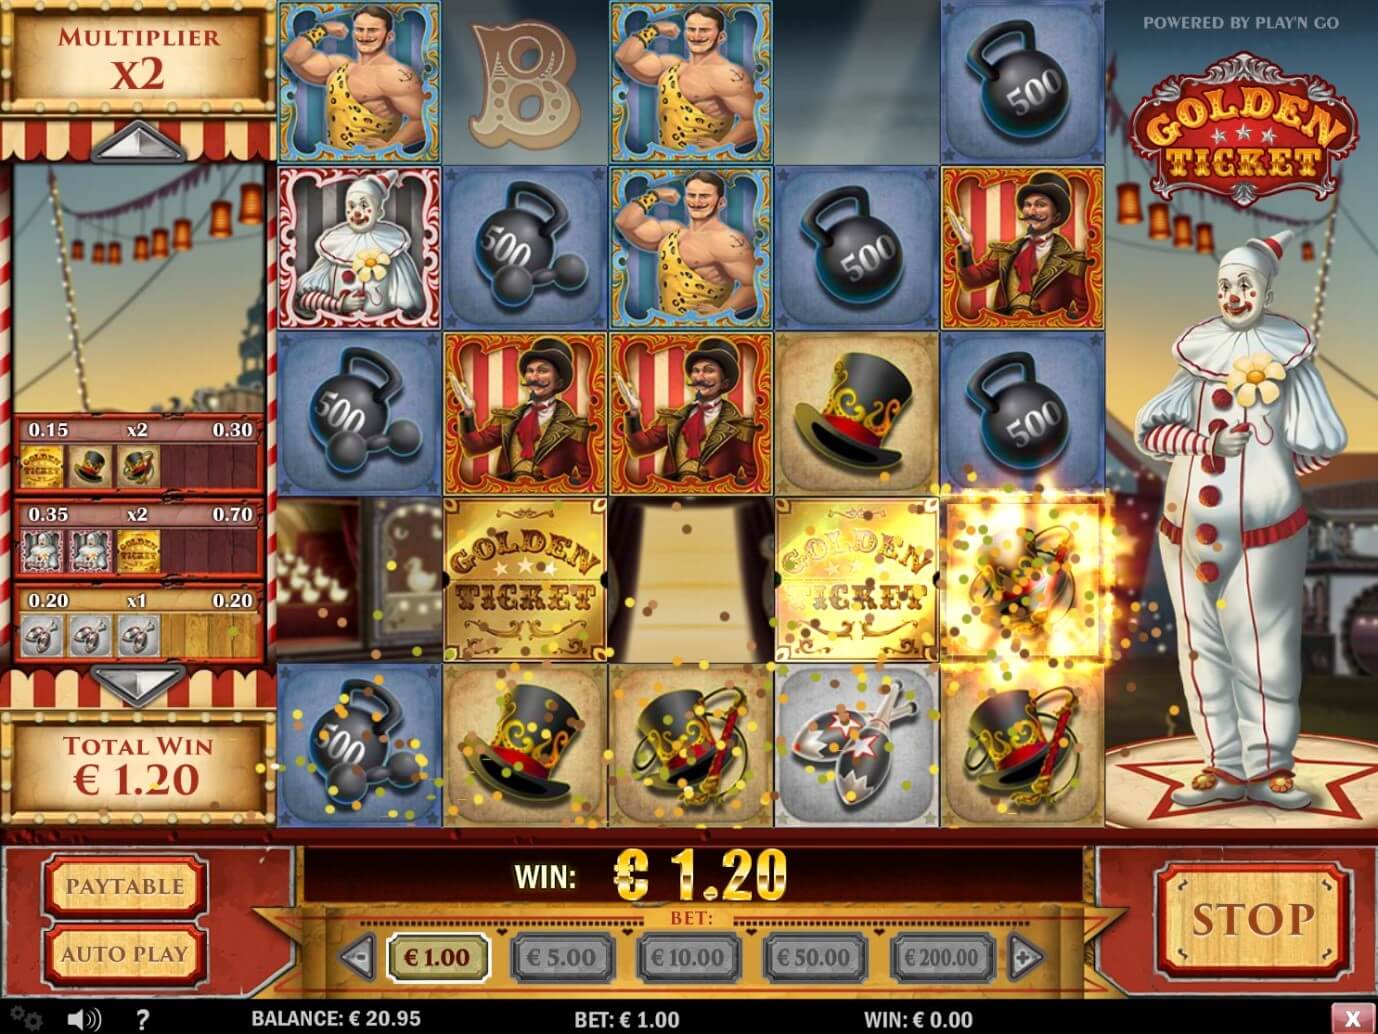 Base game of Golden Ticket online slot from PlayOJO